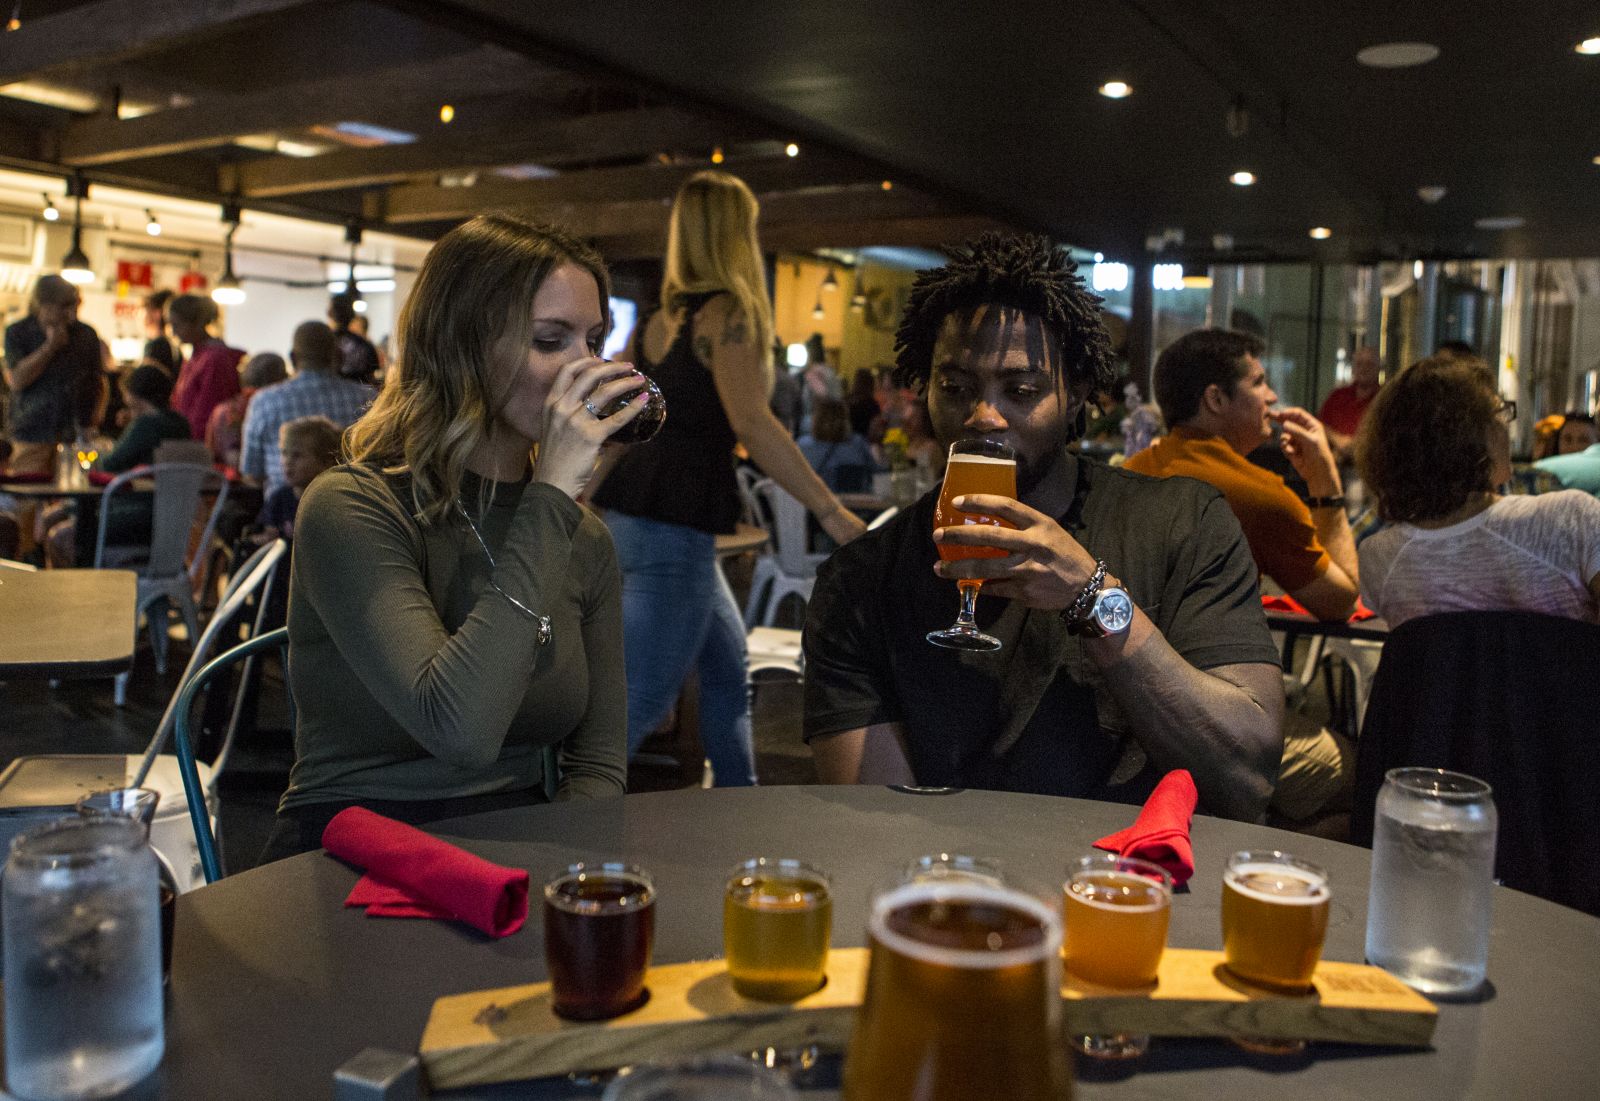 A man and woman sample beer in a busy Adirondack pub.